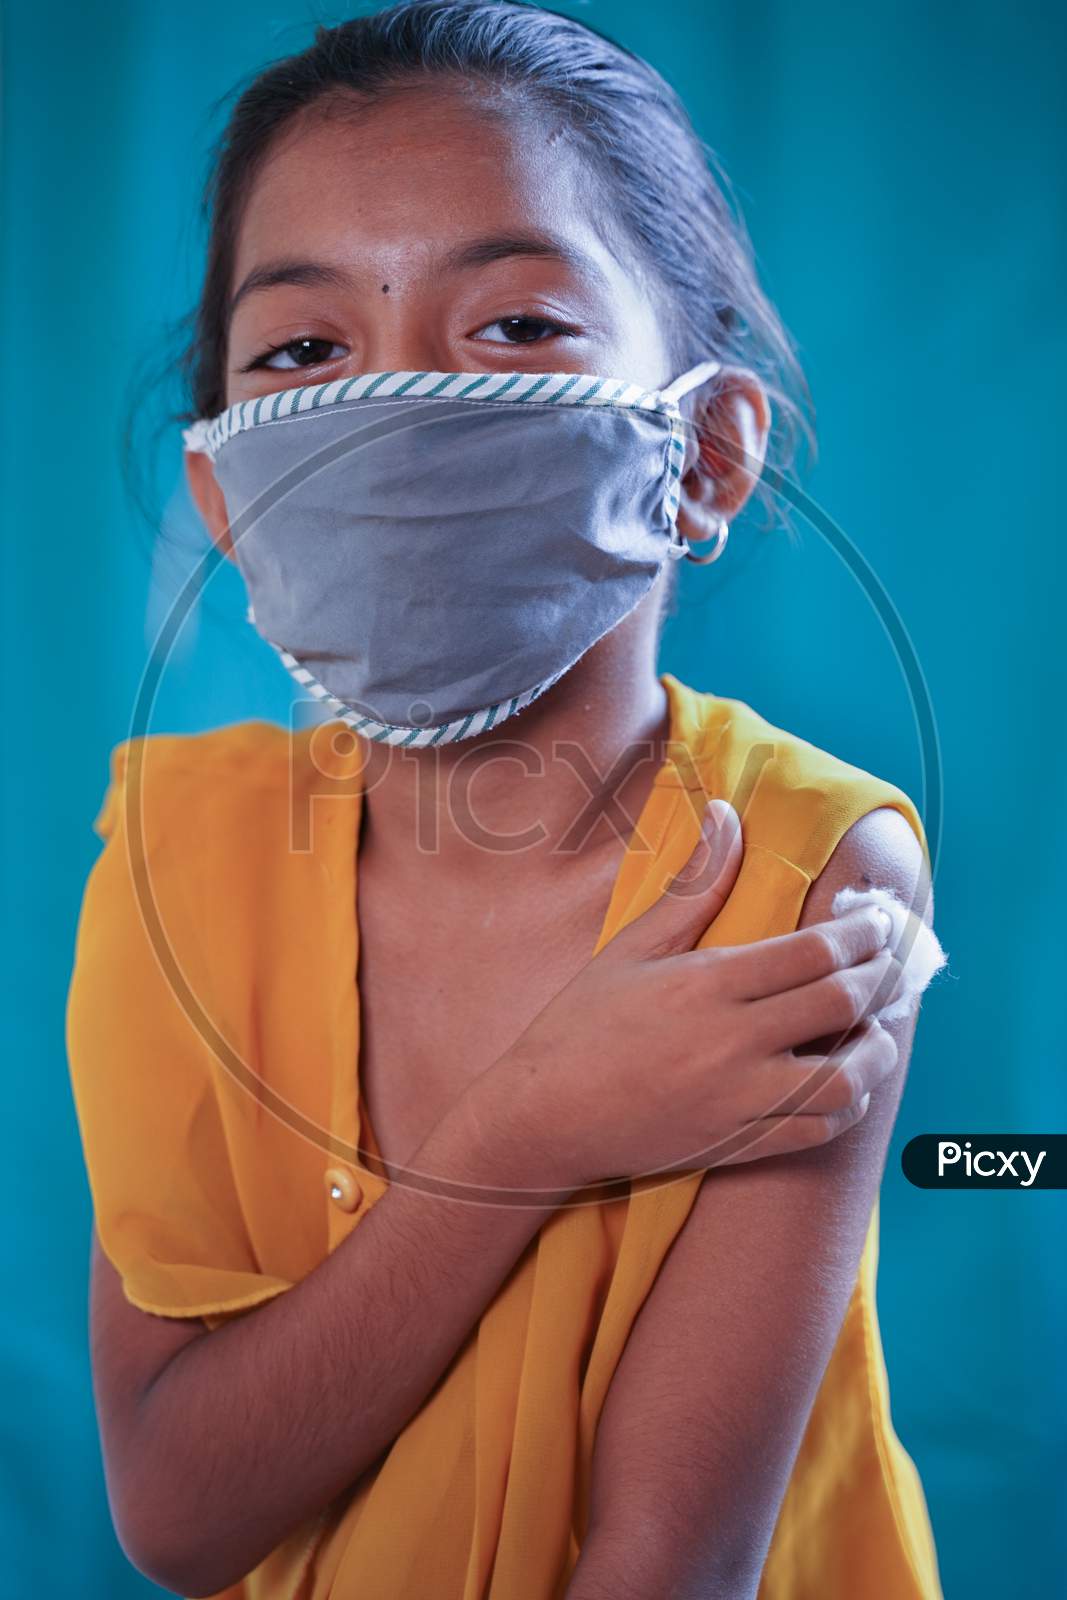 Portrait Of Covid Vaccinated Young Gril Kid With Medical Mask Looking Camera By Holding Arm - Concept Of Coronavirus Vaccination Trials For Children